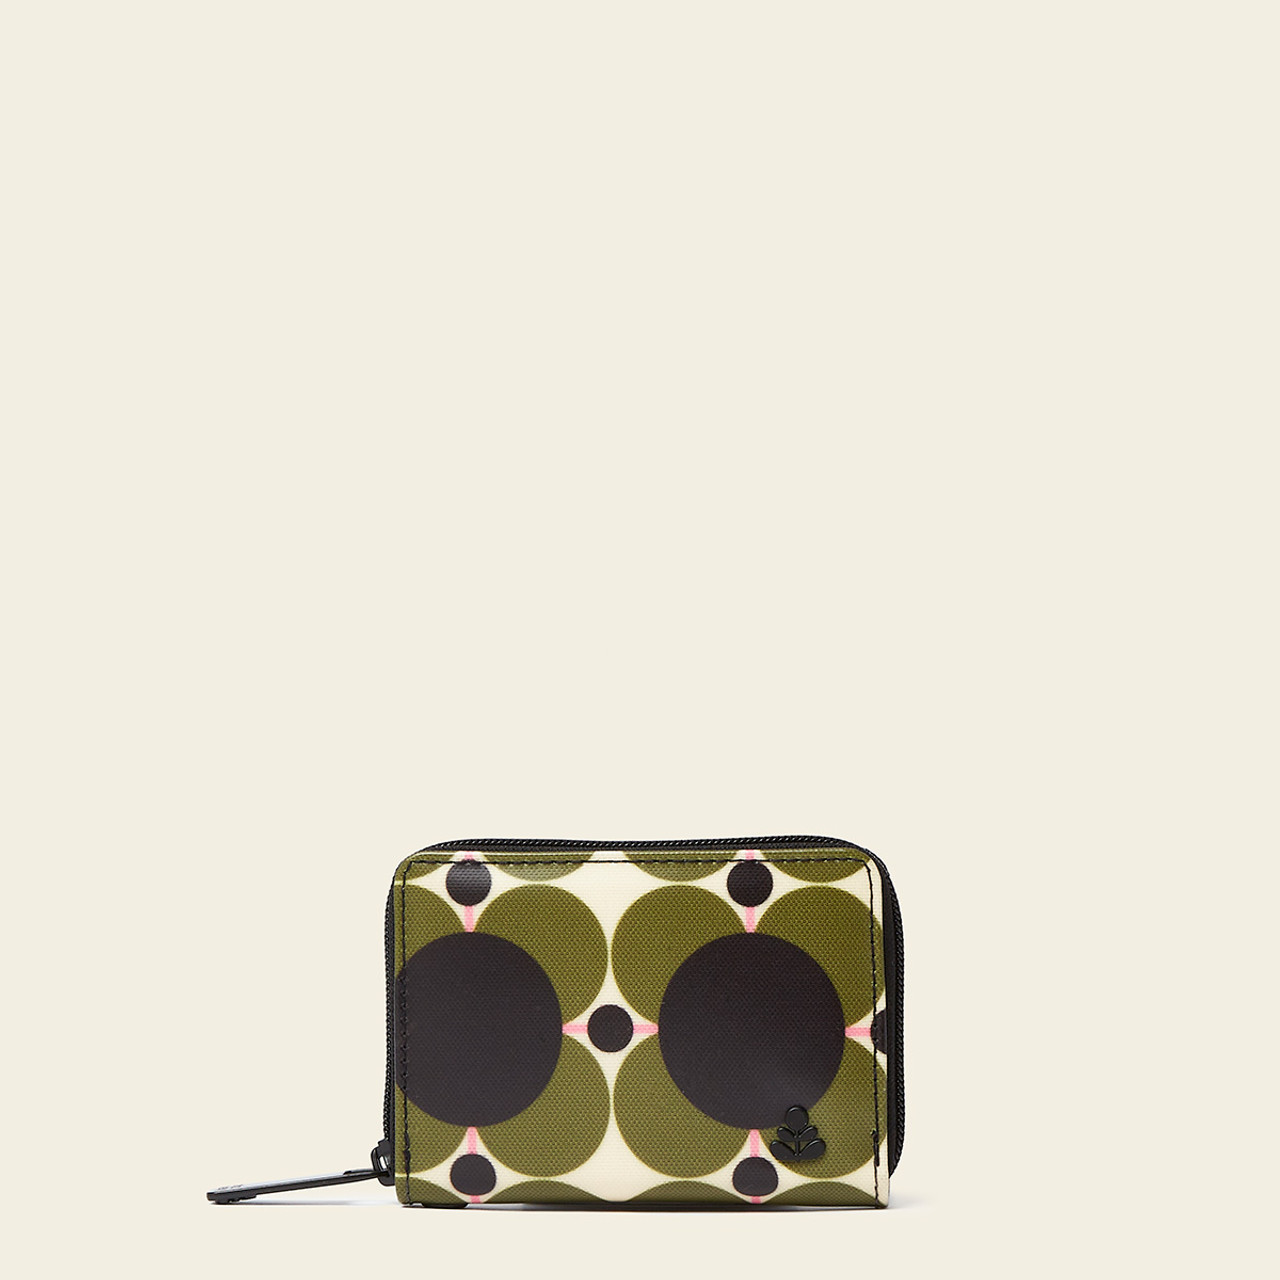 ORLA KIELY HANDBAG, patent green leather with snap front closure, fabric  lining and gold tone hardware 26cm x 22cm H x 11cm, together with matching  necklace and brooch, plus a Moschino zippered